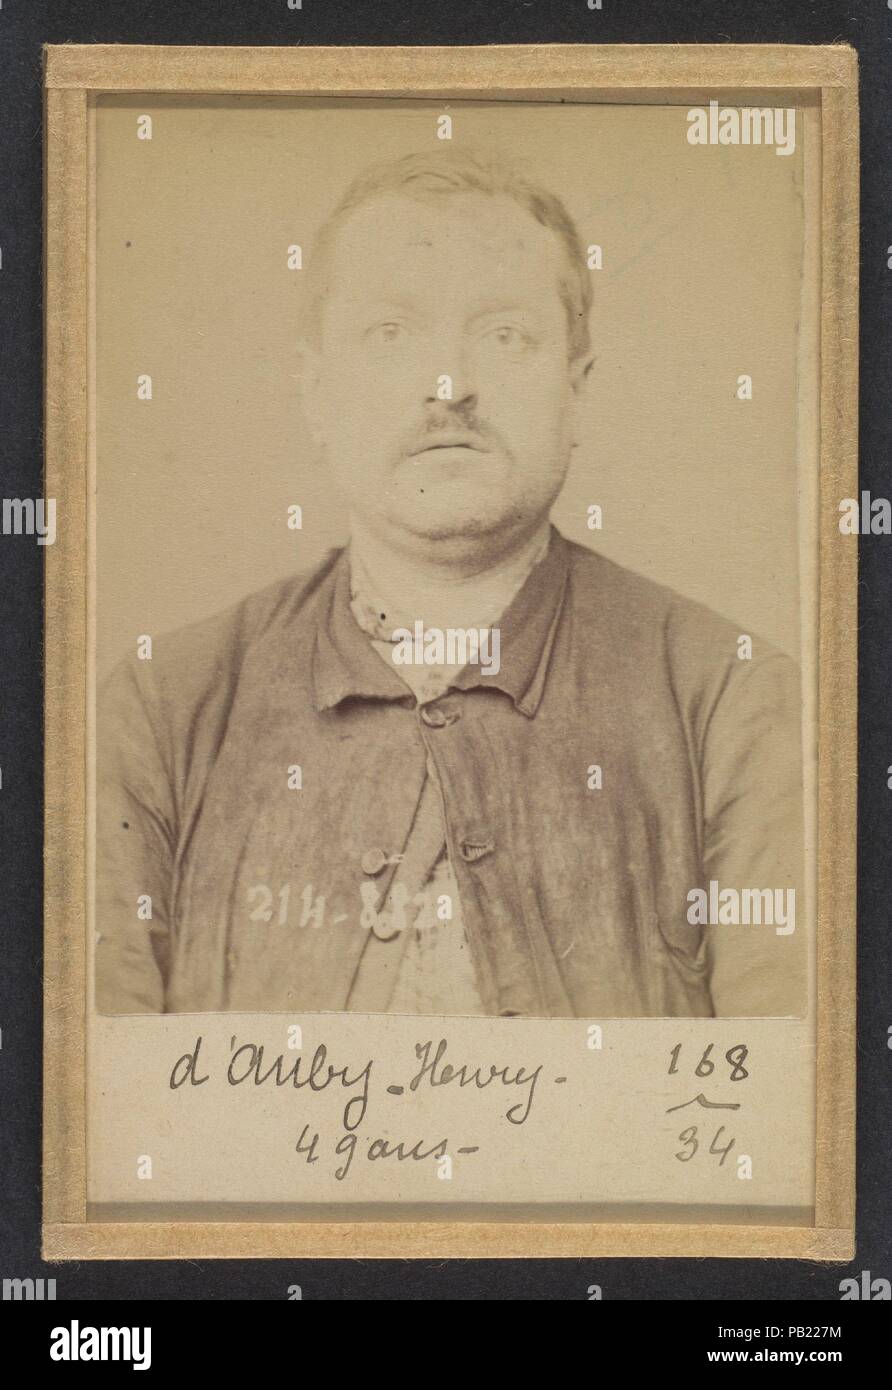 D'Auby. Henri. 48 (ou 49) ans, né à Montmédy (Meuse). Menuisier. Anarchiste. 28/2/94. Artist: Alphonse Bertillon (French, 1853-1914). Dimensions: 10.5 x 7 x 0.5 cm (4 1/8 x 2 3/4 x 3/16 in.) each. Date: 1894.  Born into a distinguished family of scientists and statisticians, Bertillon began his career as a clerk in the Identification Bureau of the Paris Prefecture of Police in 1879. Tasked with maintaining reliable police records of offenders, he developed the first modern system of criminal identification. The system, which became known as Bertillonage, had three components: anthropometric me Stock Photo